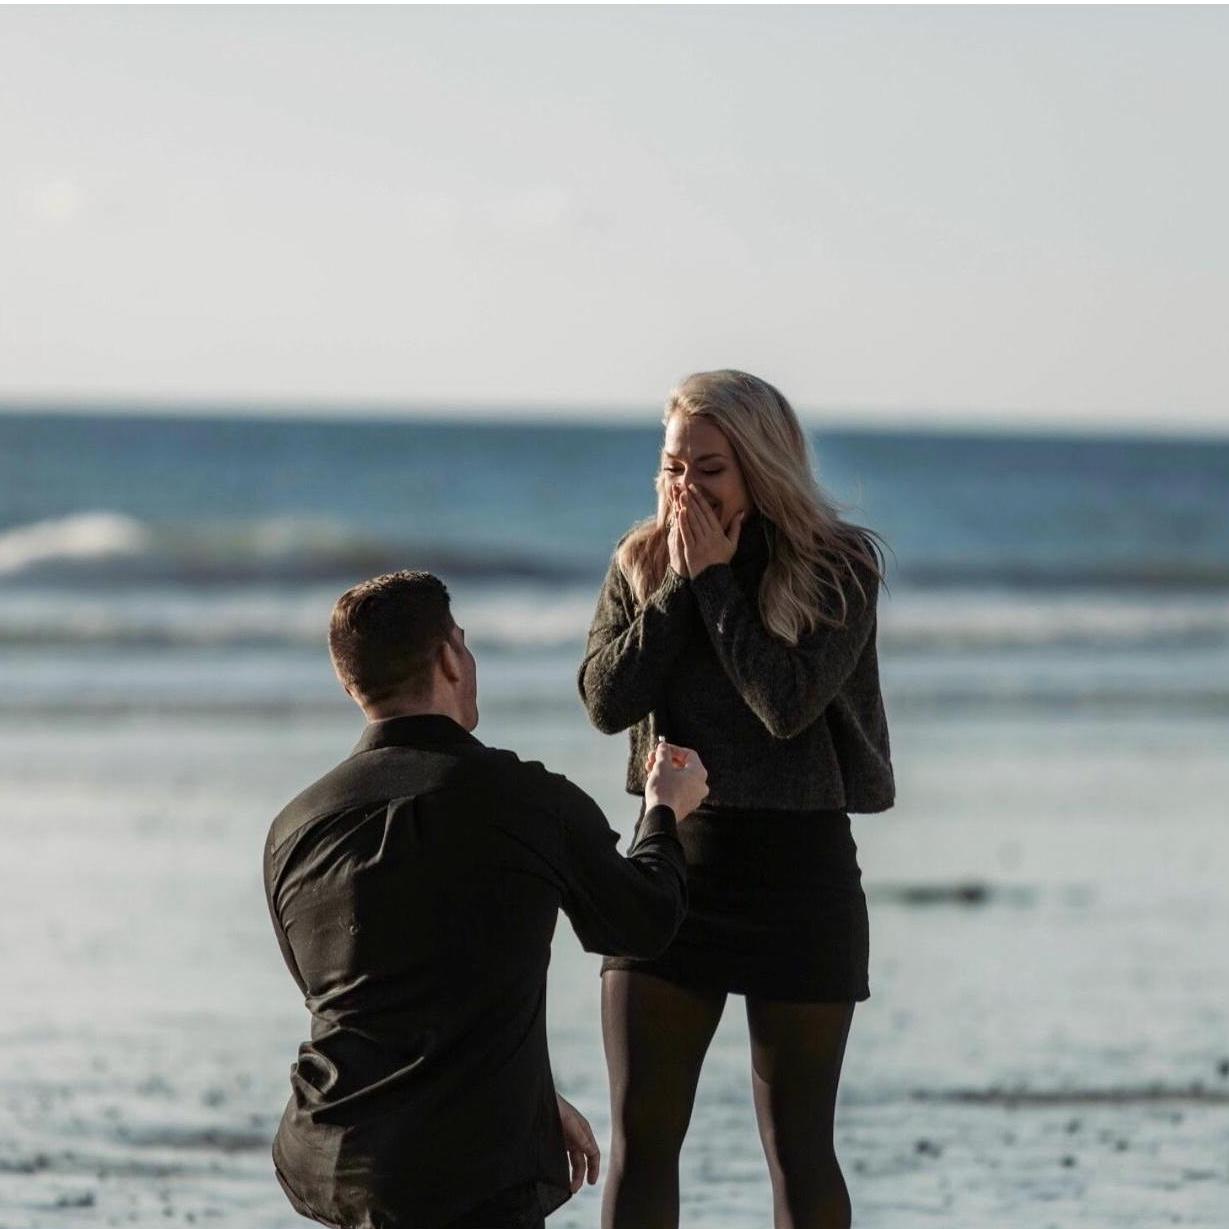 The proposal 1/11/20